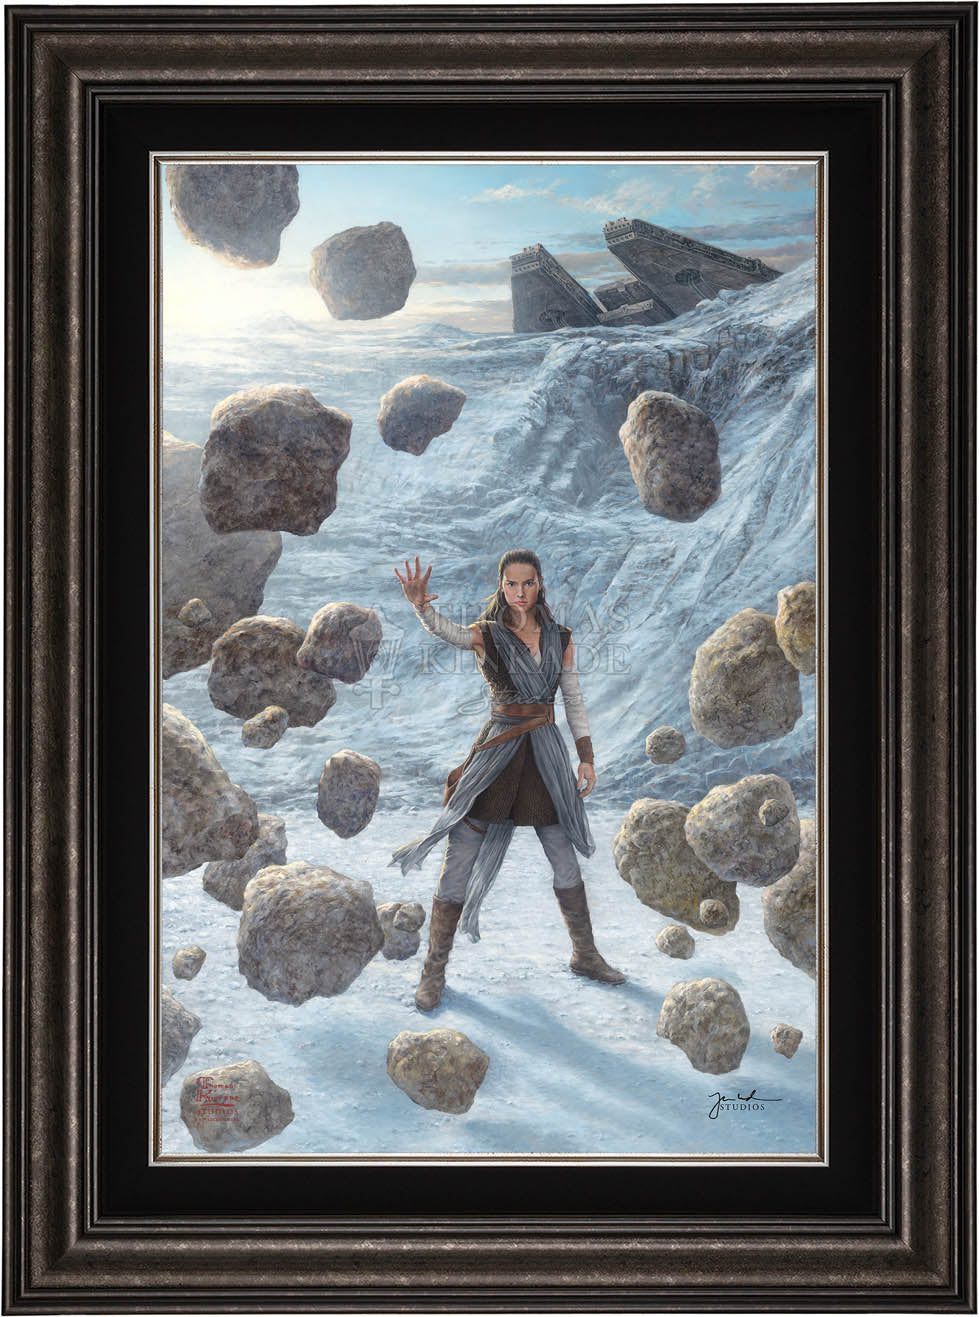 rey uses the force to lift the boulders - frame - Dark Pewterr